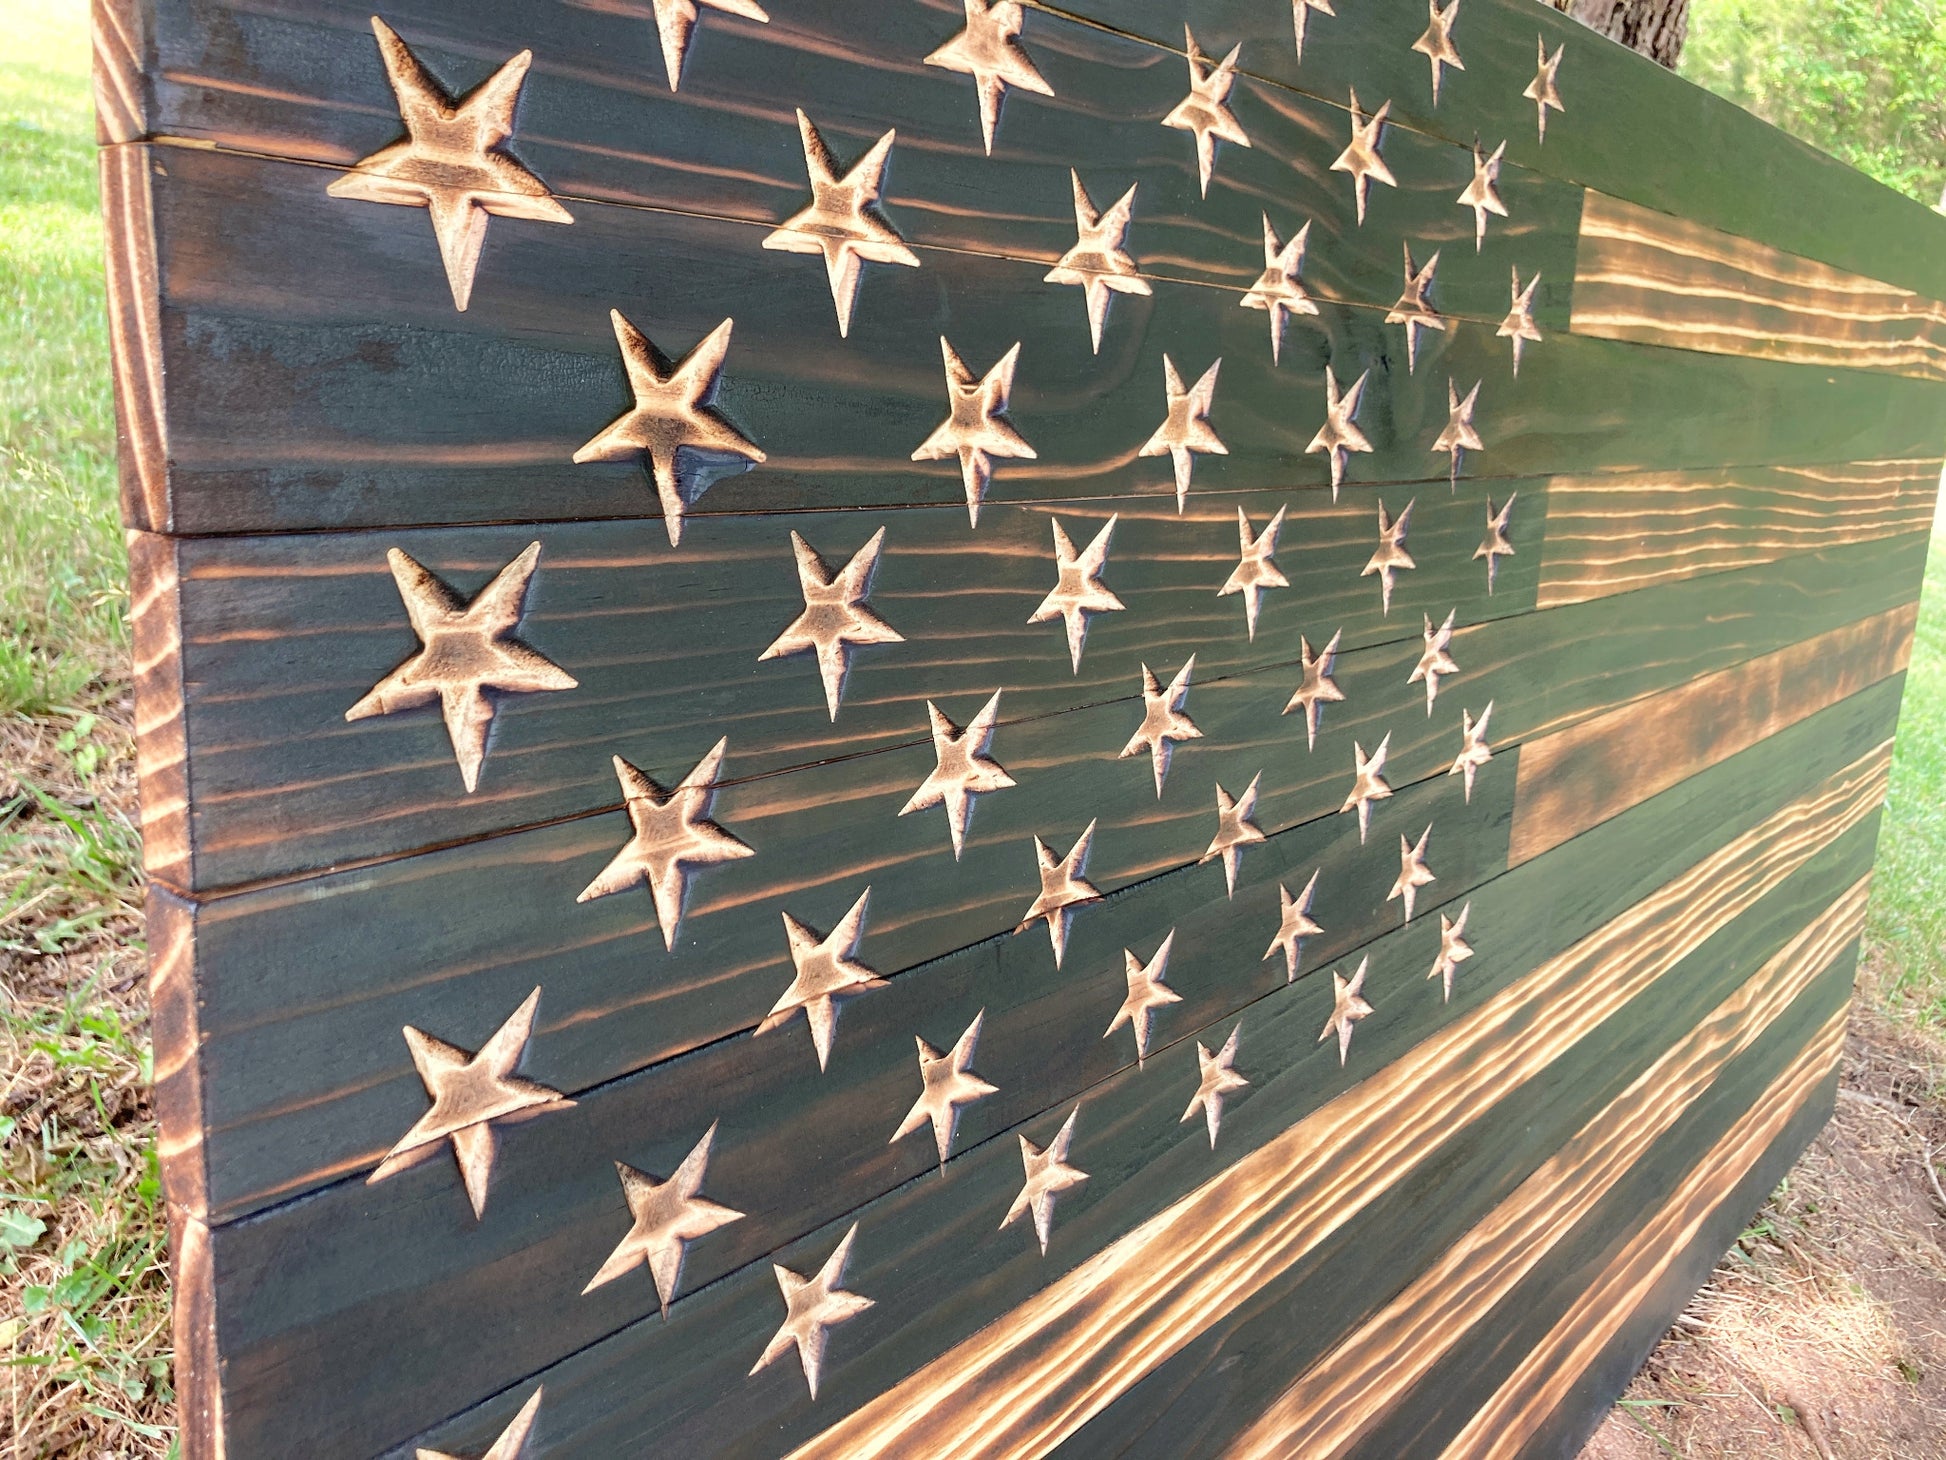 Close up of the carved stars in the union of the wooden American flag that has been burned to bring out the grain of the wood.